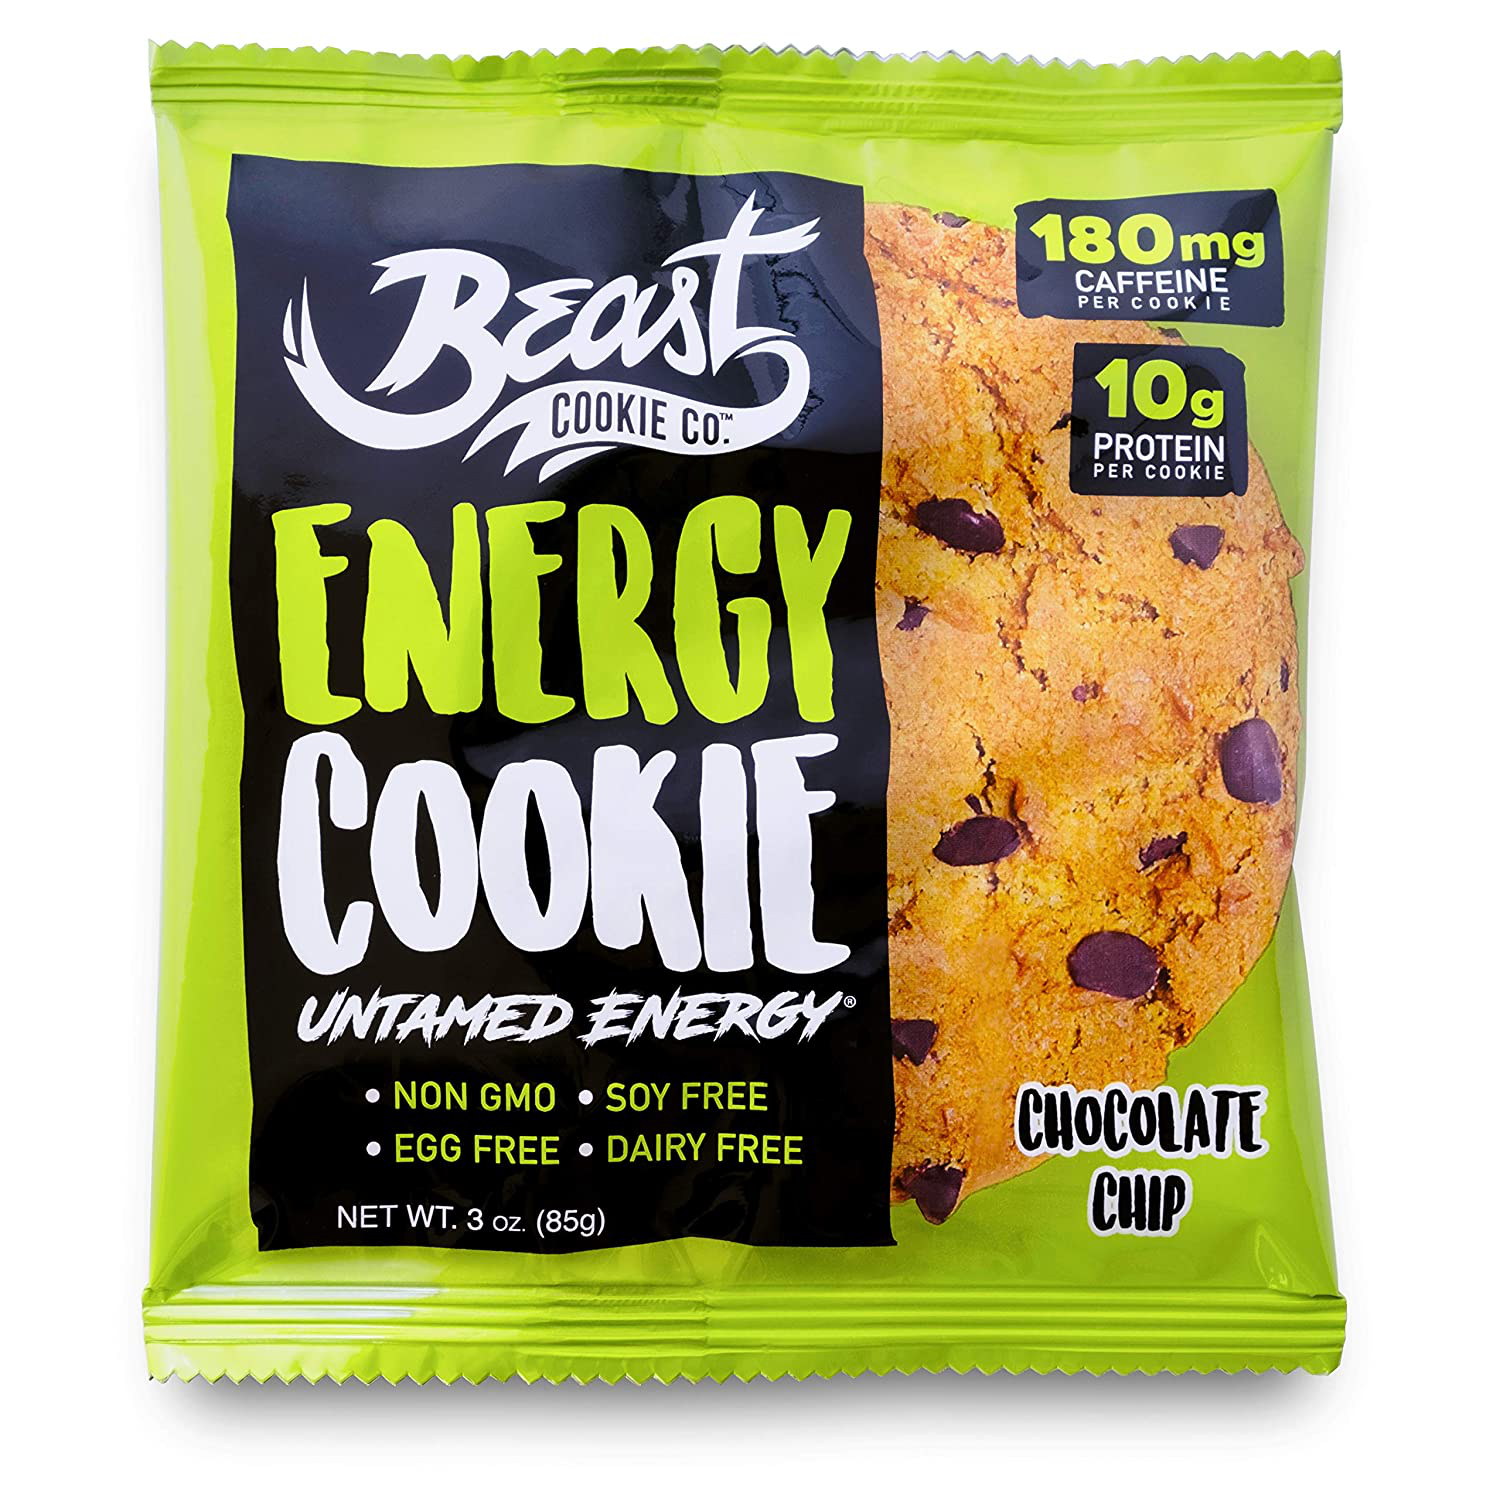 Energy cookie from Beast